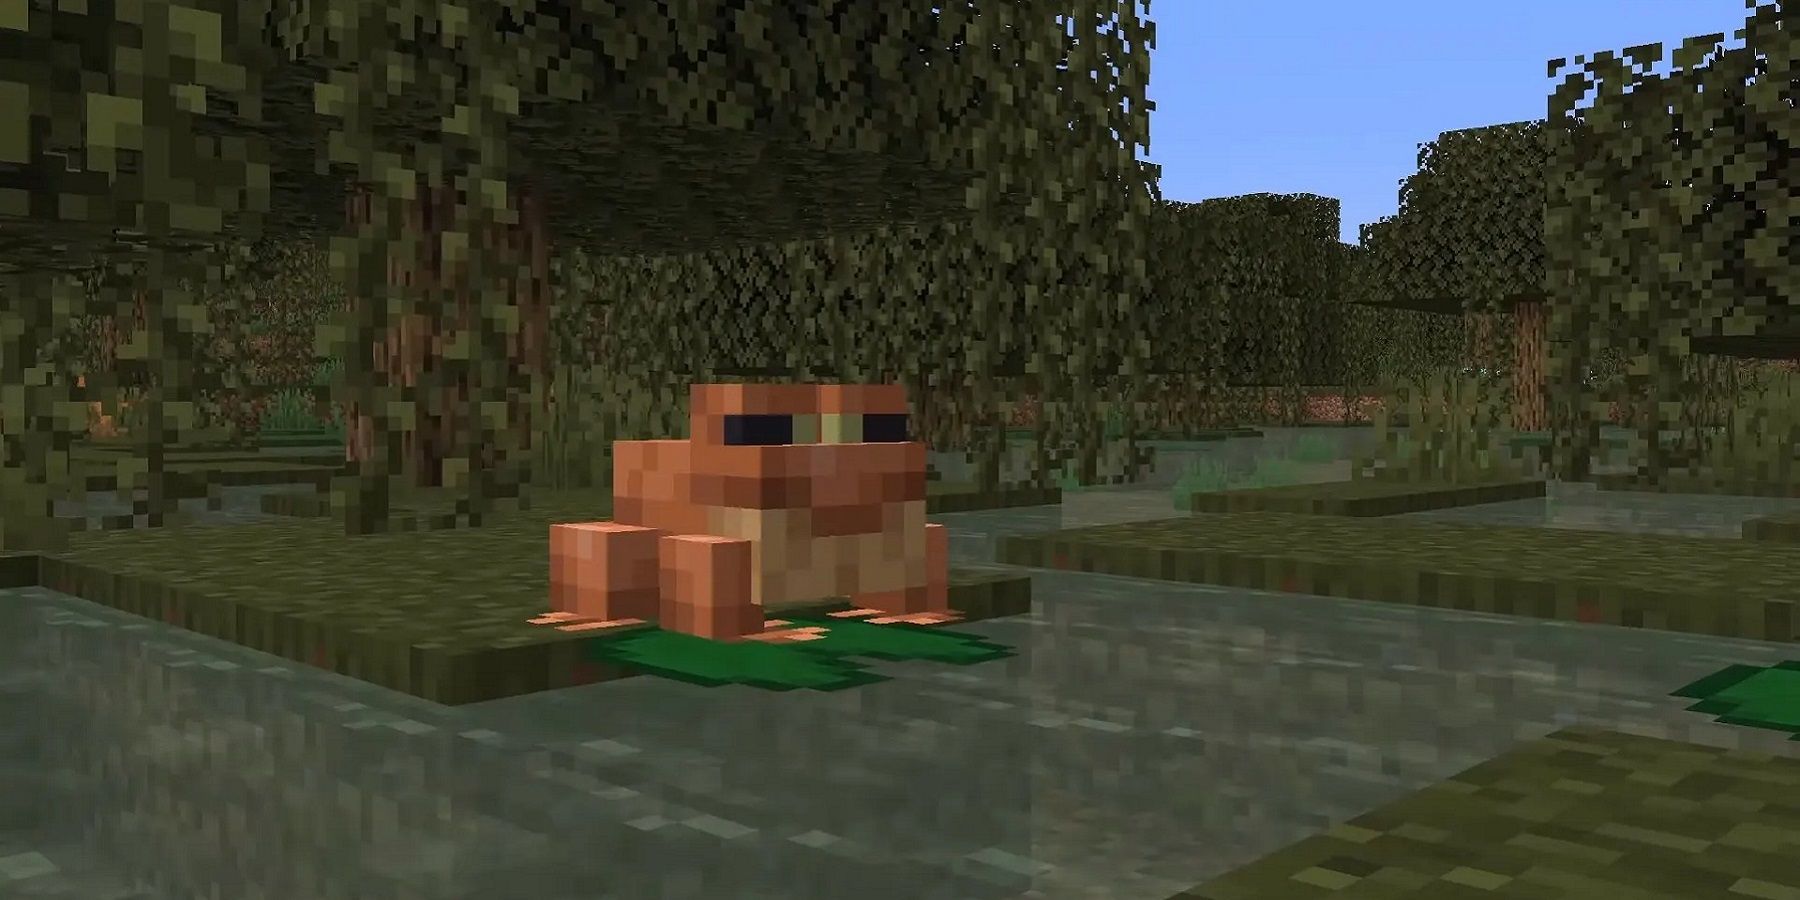 Minecraft screenshot showing a frog on a lily pad.